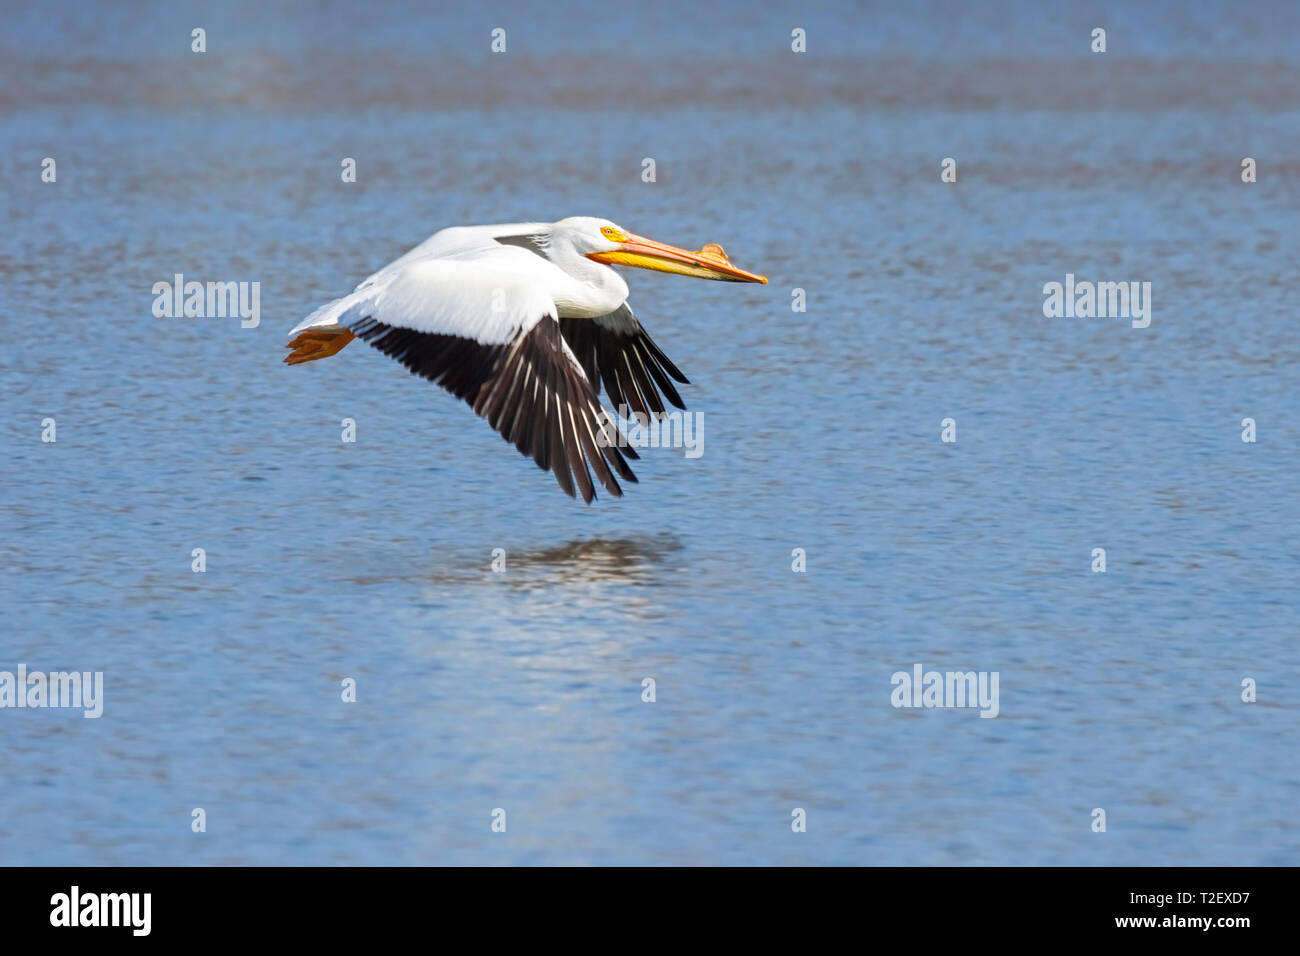 Beak pointed forward, black tipped feathers positioned downward, a single American white pelican glidess across rippling blue water. Stock Photo